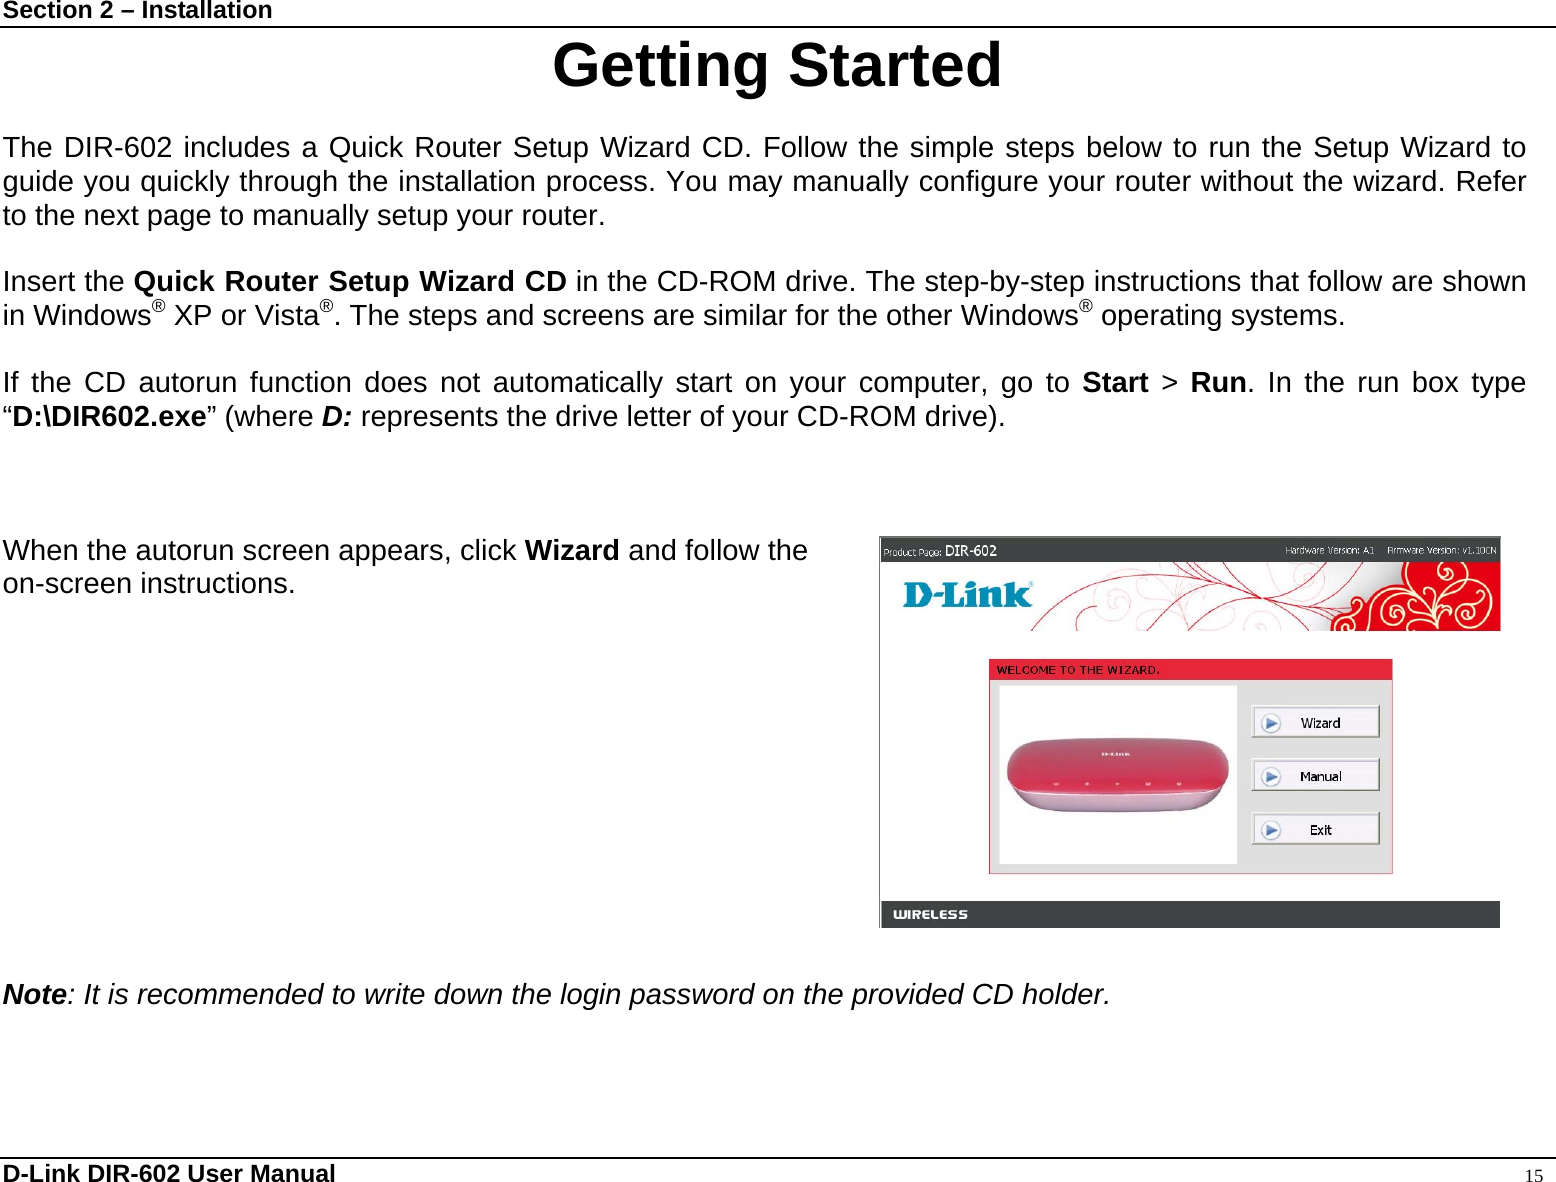 Section 2 – Installation  Getting Started  The DIR-602 includes a Quick Router Setup Wizard CD. Follow the simple steps below to run the Setup Wizard to guide you quickly through the installation process. You may manually configure your router without the wizard. Refer to the next page to manually setup your router.  Insert the Quick Router Setup Wizard CD in the CD-ROM drive. The step-by-step instructions that follow are shown in Windows® XP or Vista®. The steps and screens are similar for the other Windows® operating systems.  If the CD autorun function does not automatically start on your computer, go to Start &gt; Run. In the run box type “D:\DIR602.exe” (where D: represents the drive letter of your CD-ROM drive).    When the autorun screen appears, click Wizard and follow the   on-screen instructions.               Note: It is recommended to write down the login password on the provided CD holder. D-Link DIR-602 User Manual                                                                                               15 